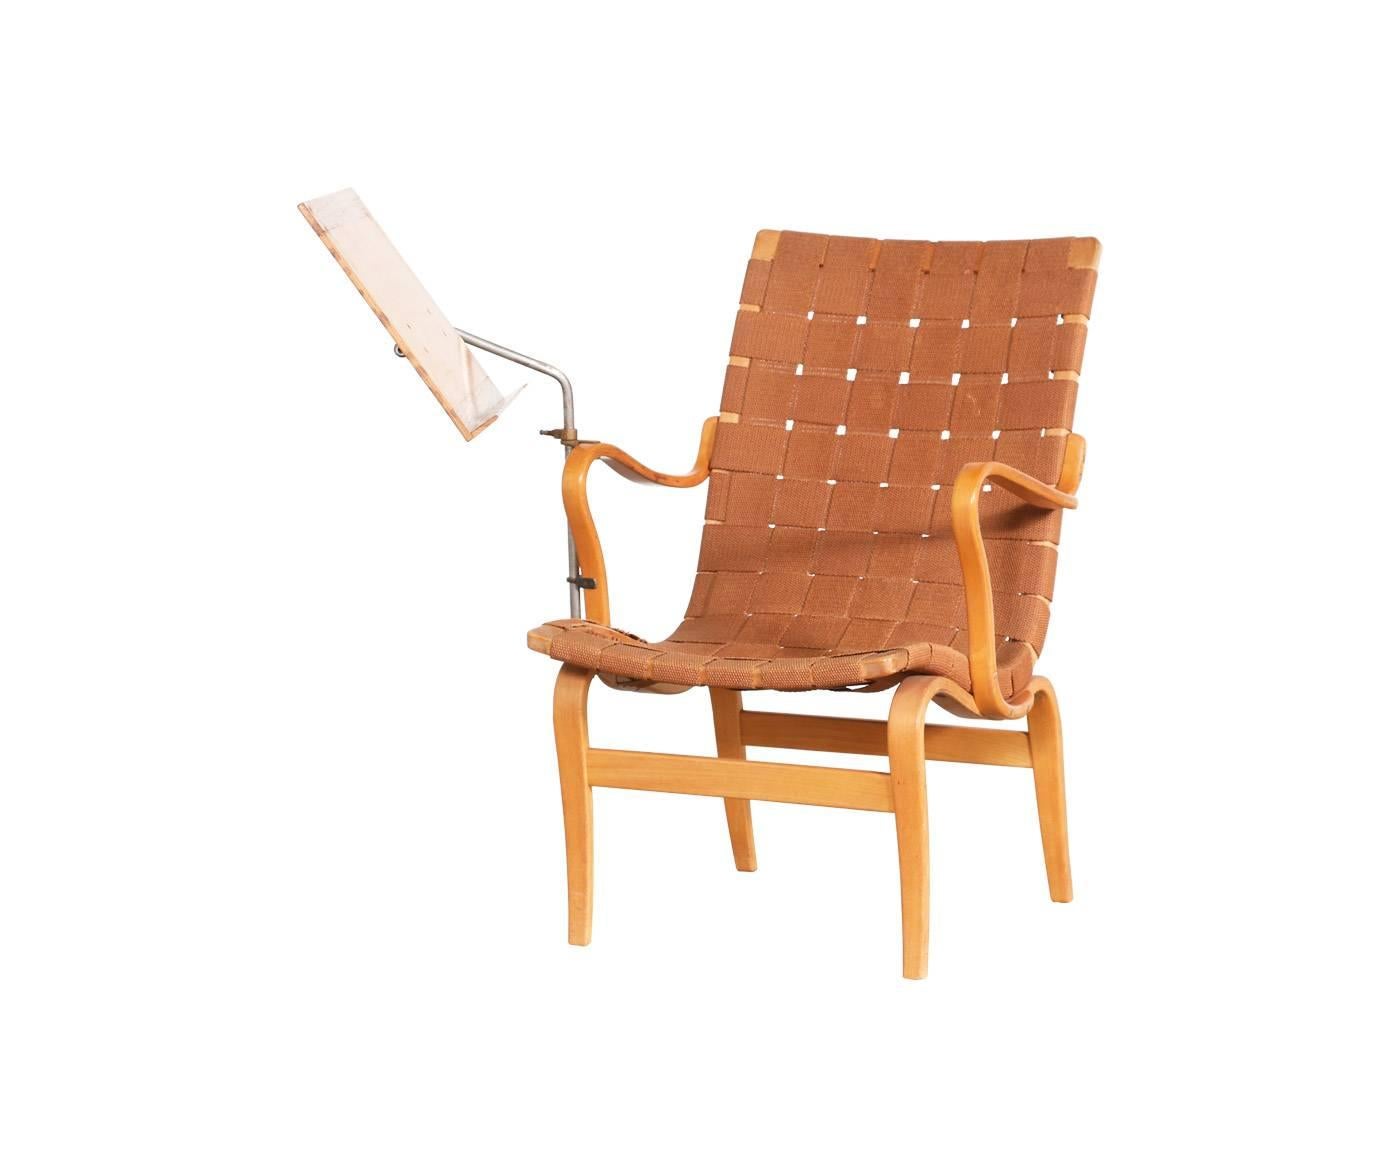 Designer: Bruno Mathsson.
Manufacturer: Karl Mathsson.
Period/Style: Swedish Modern
Country: Sweden
Date: 1936.

Dimensions: 33″ H x 23.5″ W x 27″ D,
seat height 15.5″.
Materials: Birch, beech, webbing.
Condition: As is – needs new straps